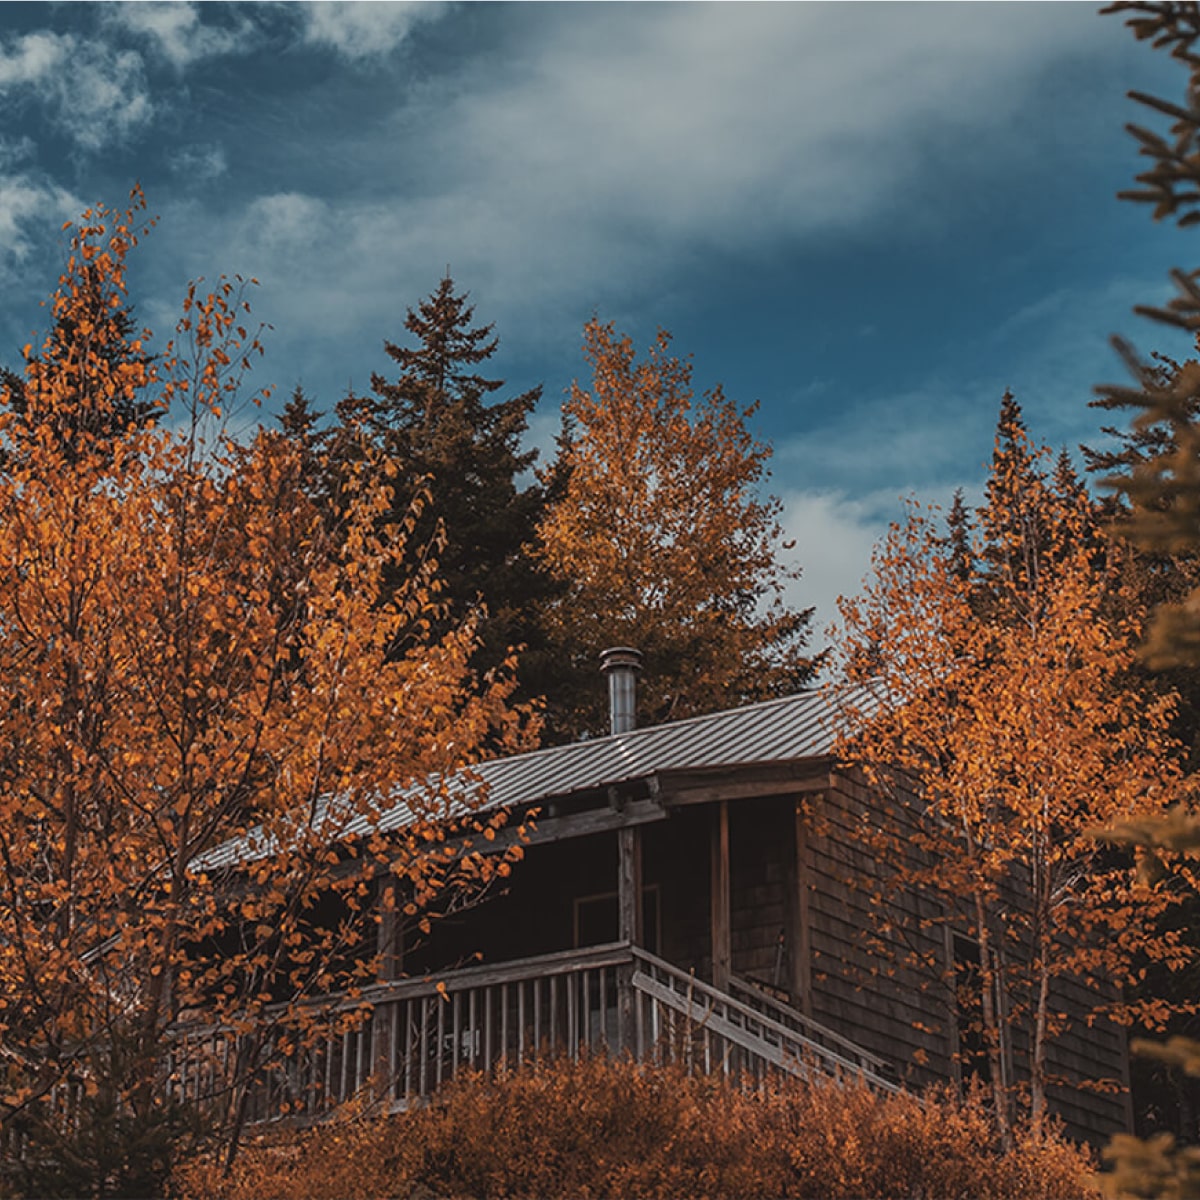 High Cabin in the fall